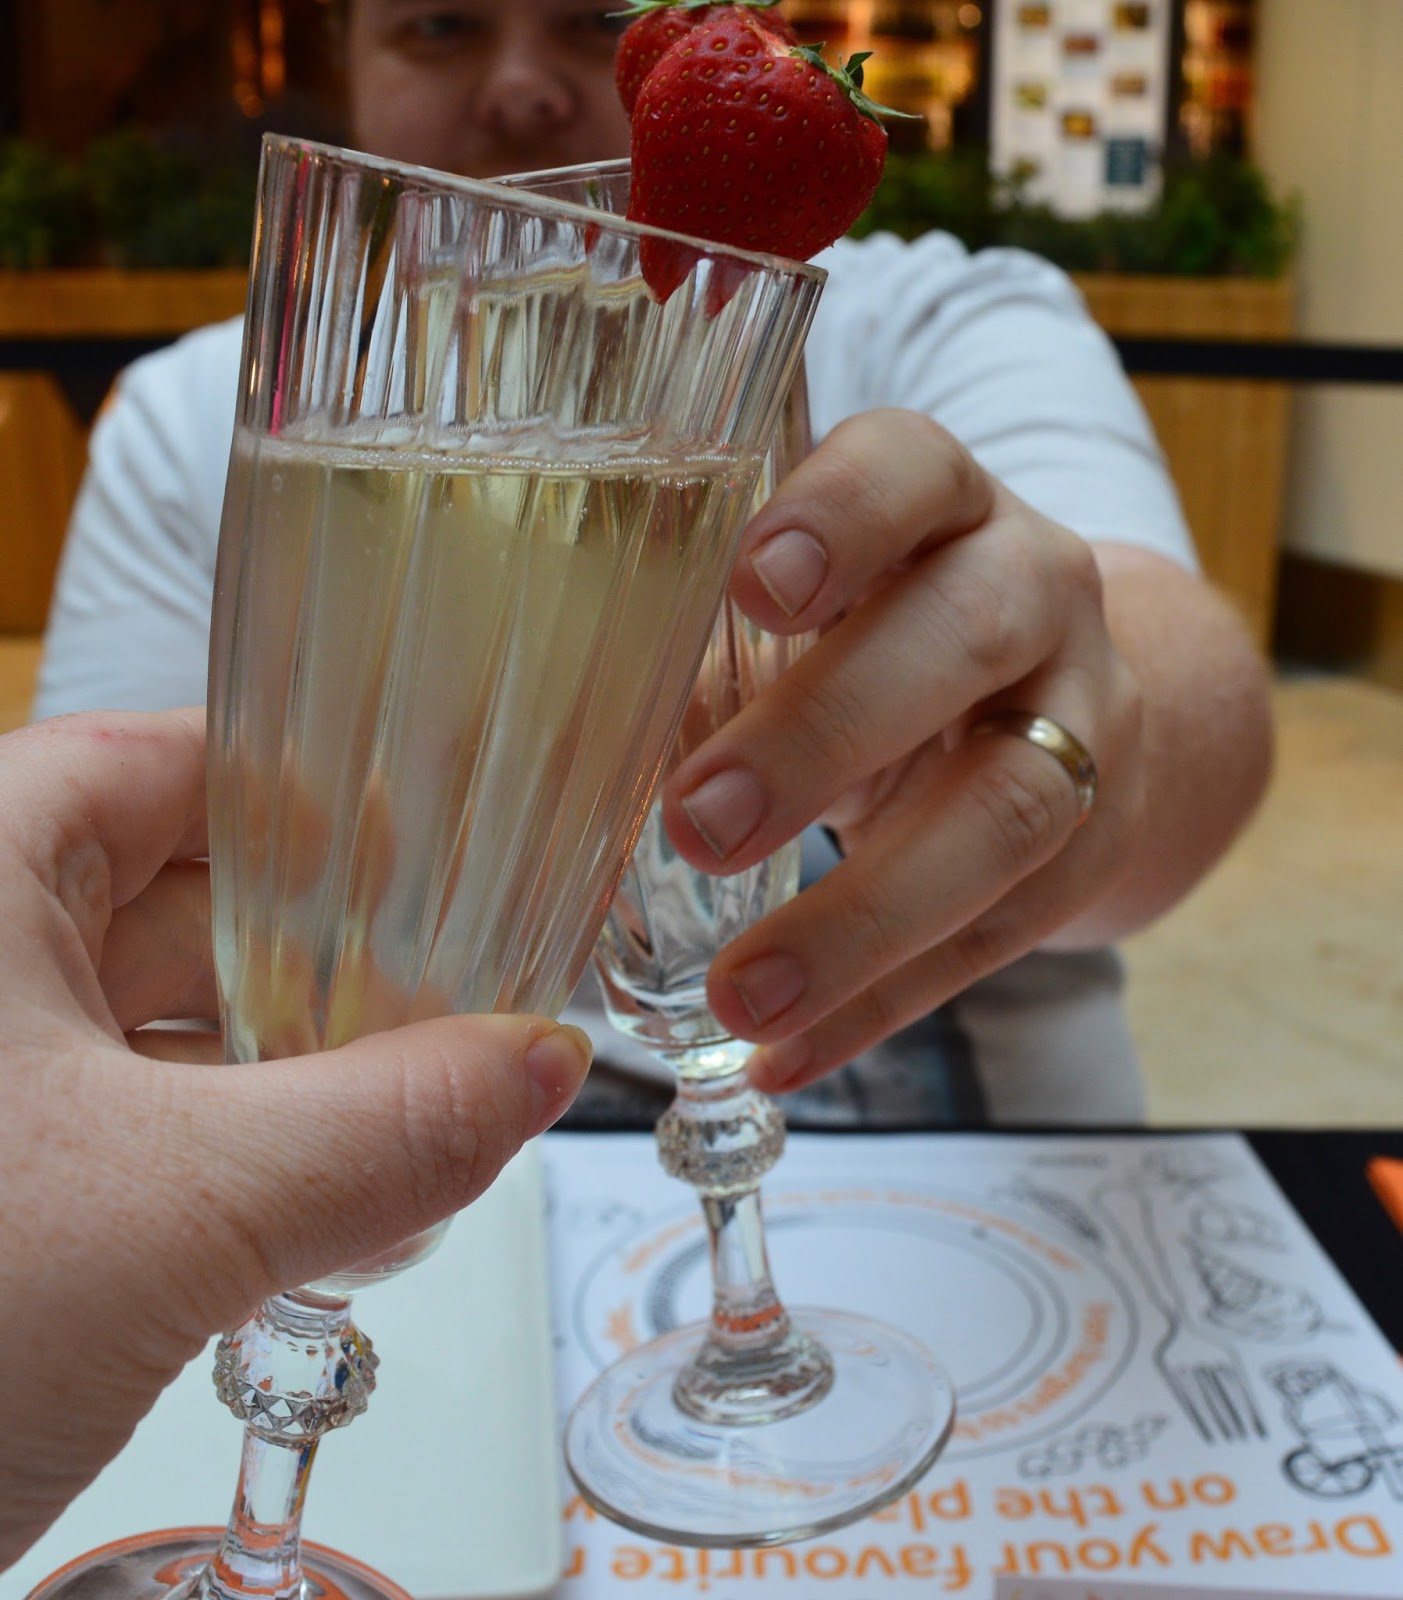 Our Guide to Family Restaurants & Children's Menus at intu Metrocentre - Prosecco from Ask